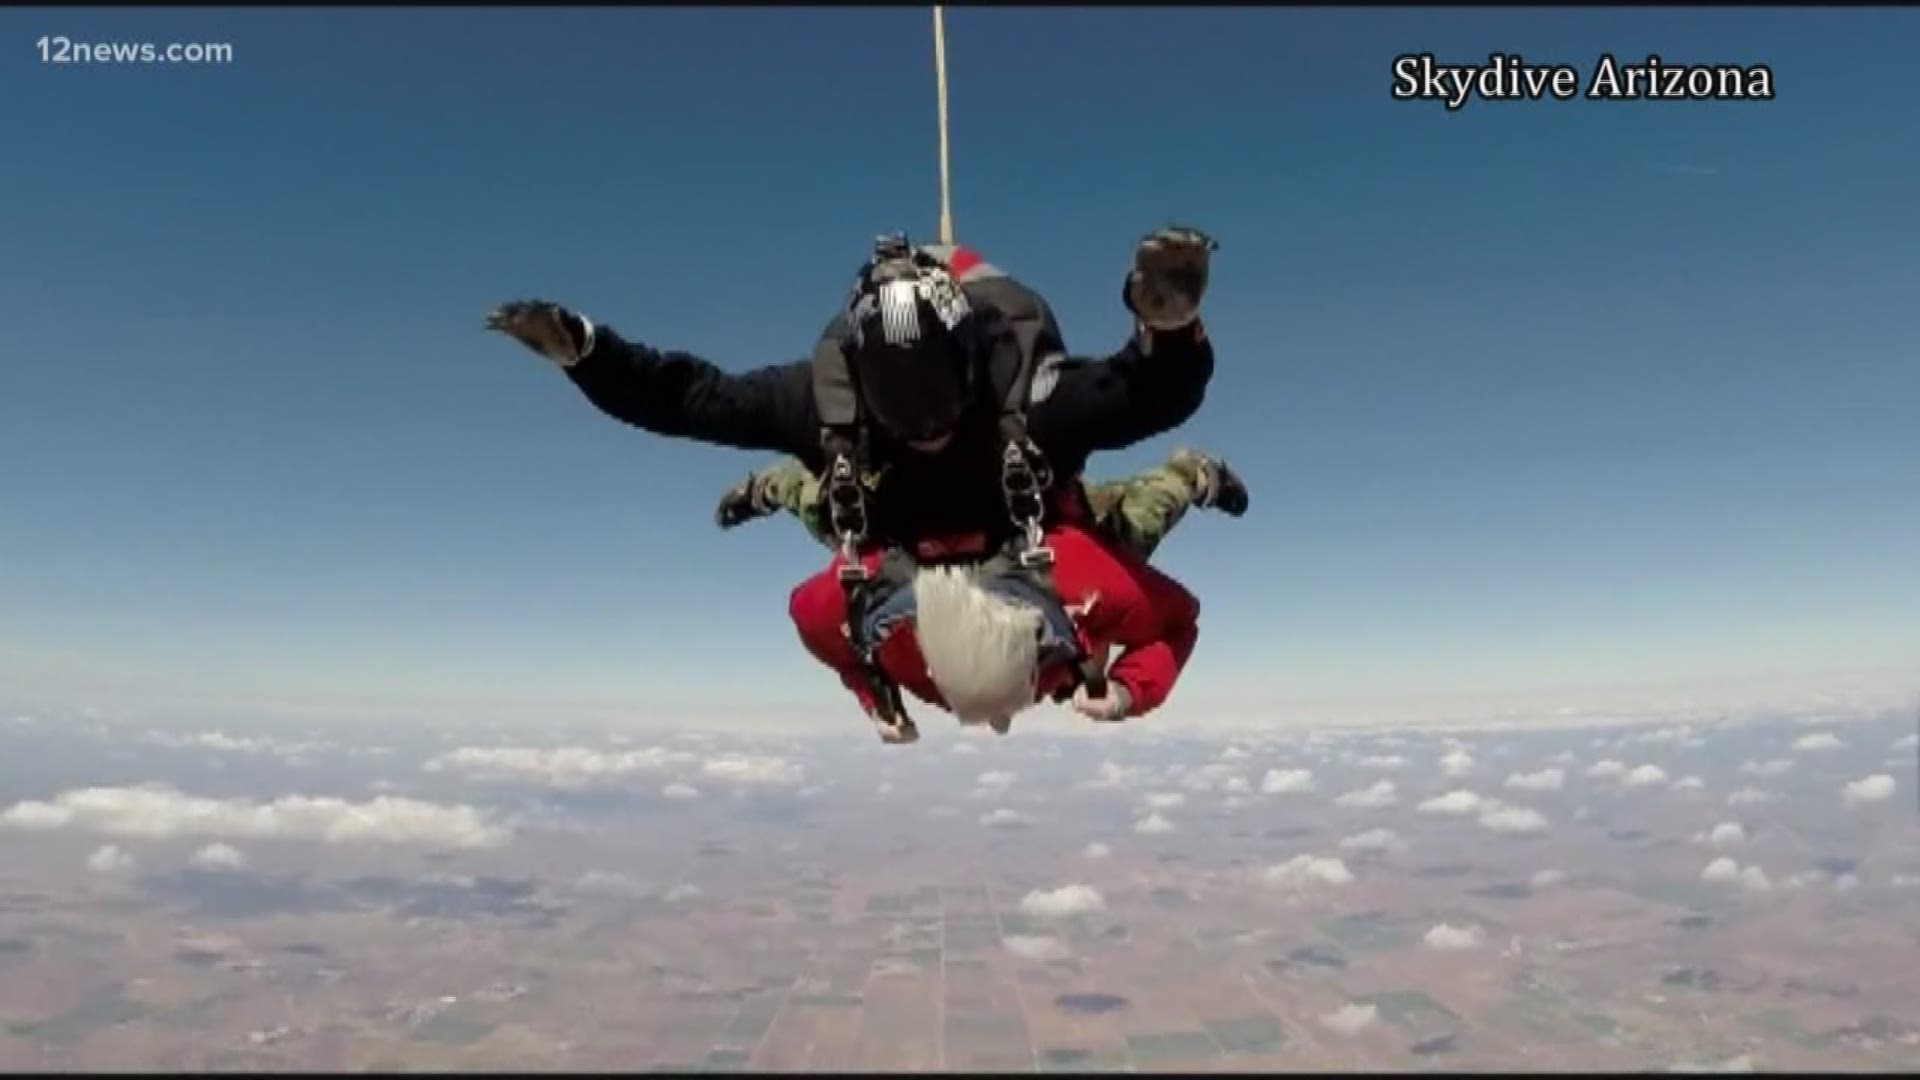 Jane Hayes celebrated her 100th birthday in style on Saturday, by jumping out of an airplane.